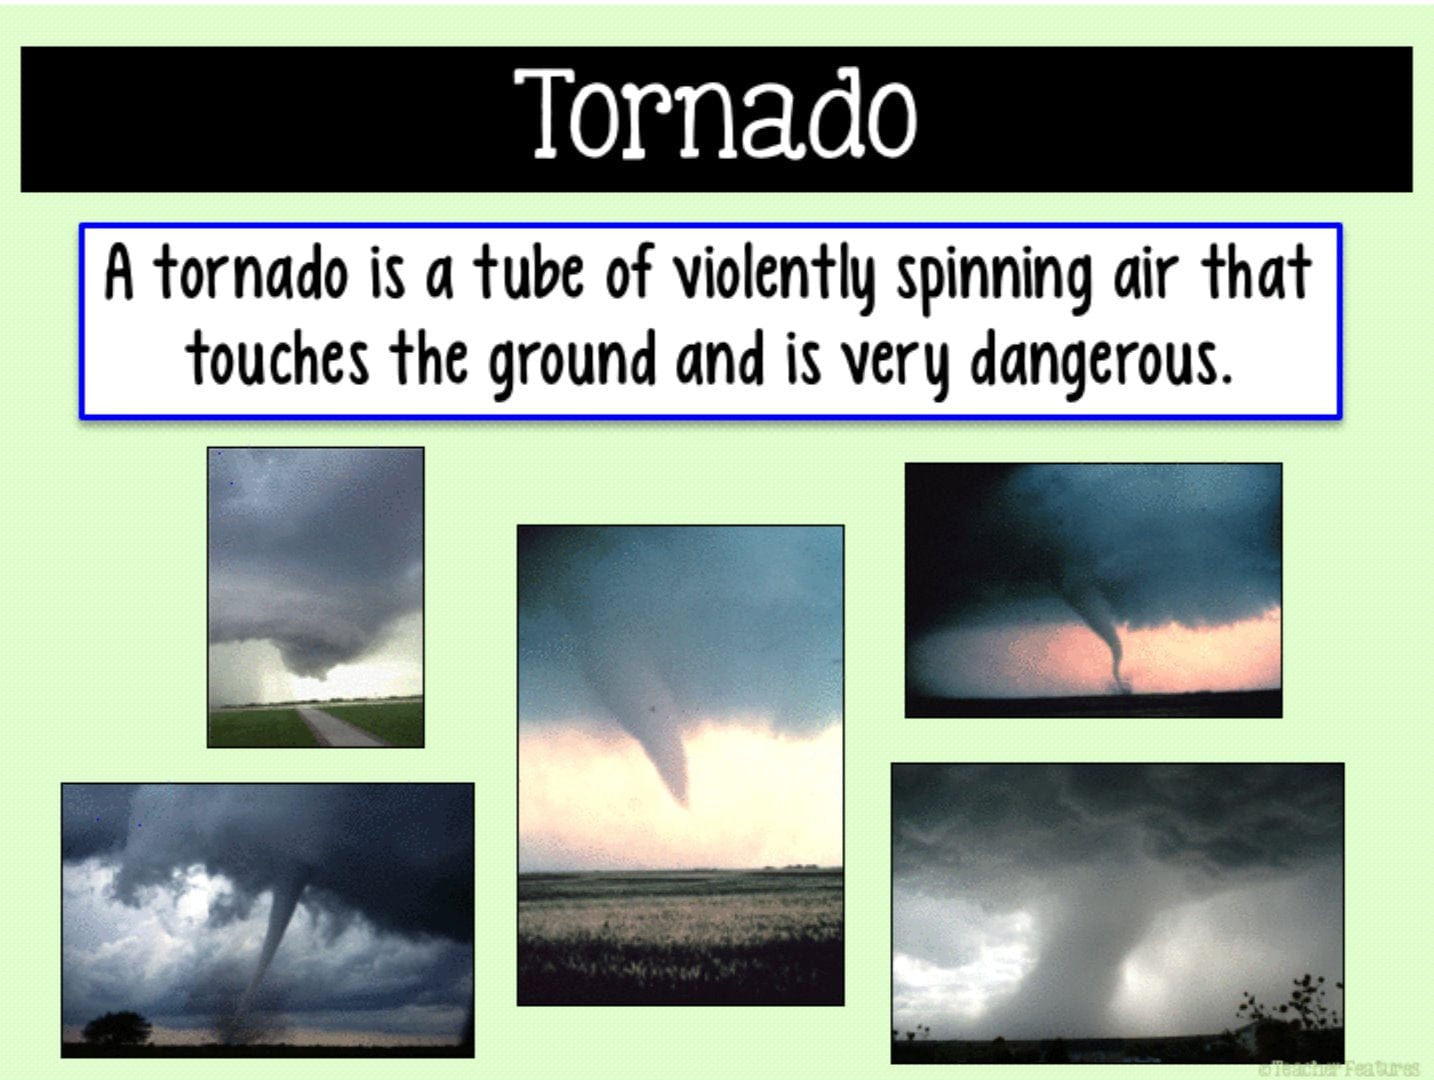 TYPES OF WEATHER & VOCABULARY Google Slides Digital Download Teacher Features